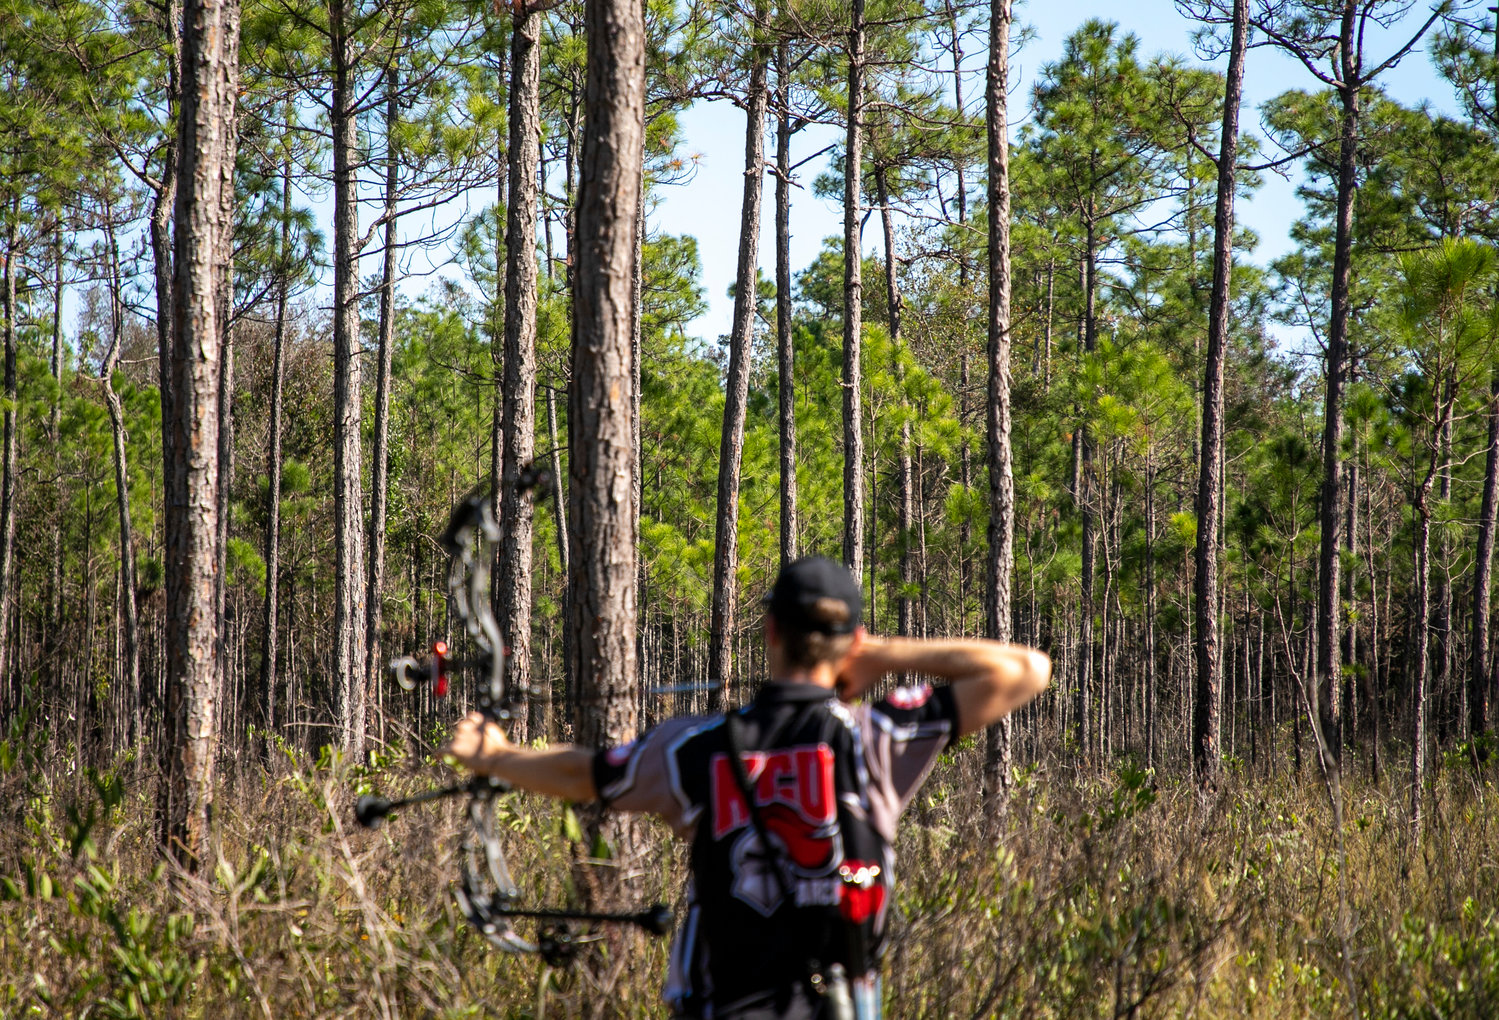 The Graham Creek Nature Preserve hosted USA Archery’s 3D Collegiate National Championships last weekend where the University of the Cumberlands won its fifth straight team title. The Archery Shooters Association will soon use the same setting to kick off the 2023 pro/am schedule.